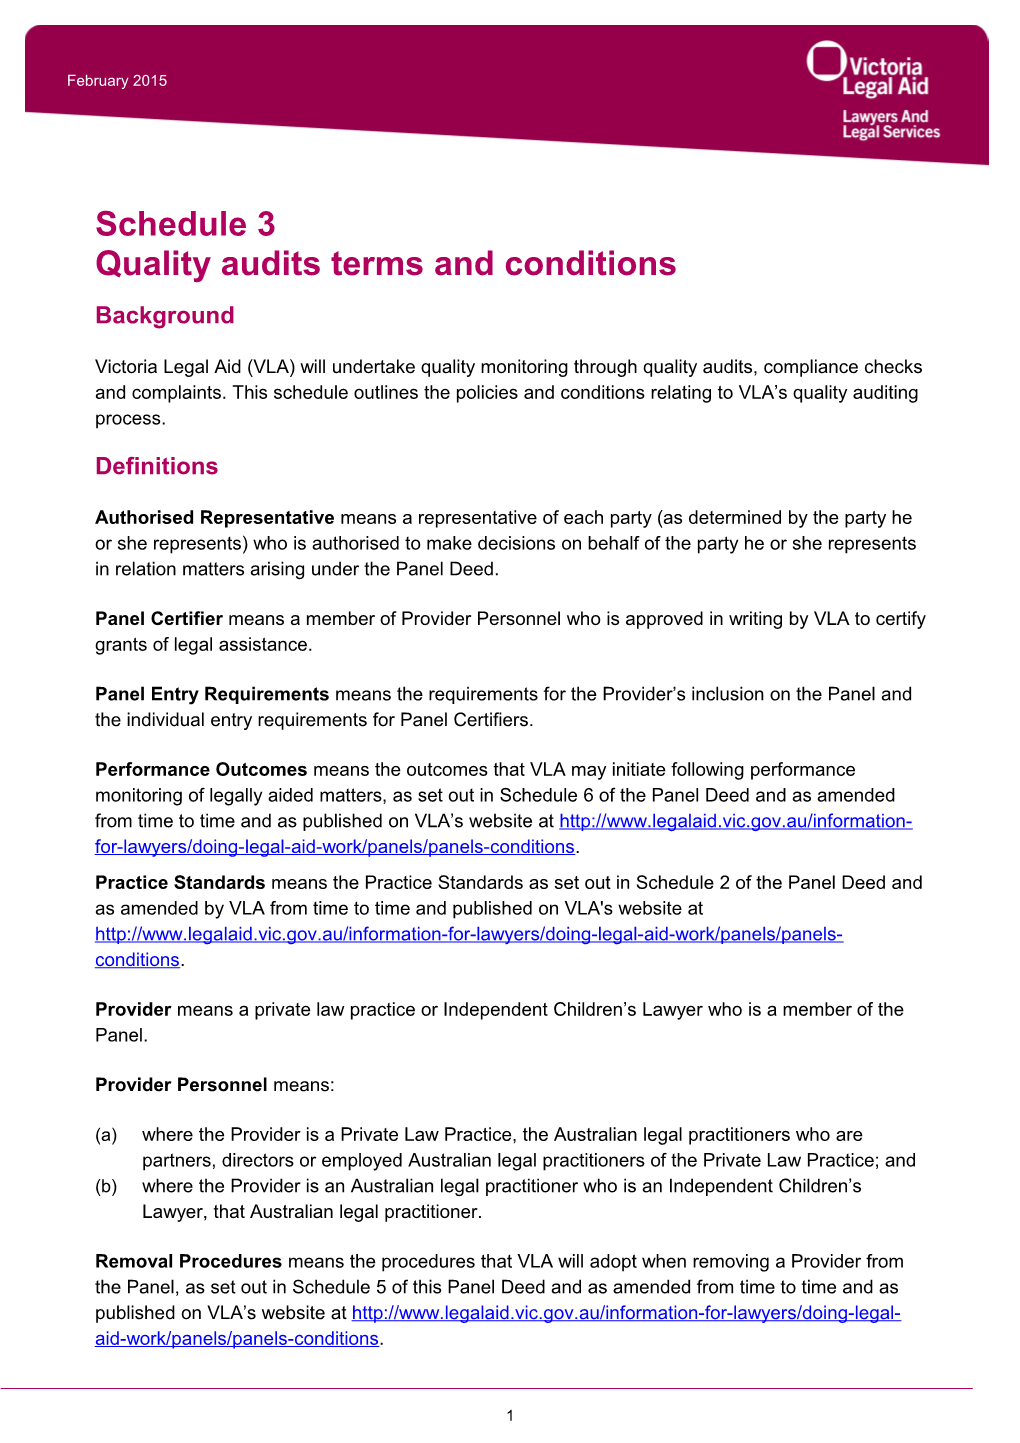 Schedule 3 Quality Audits Terms and Conditions